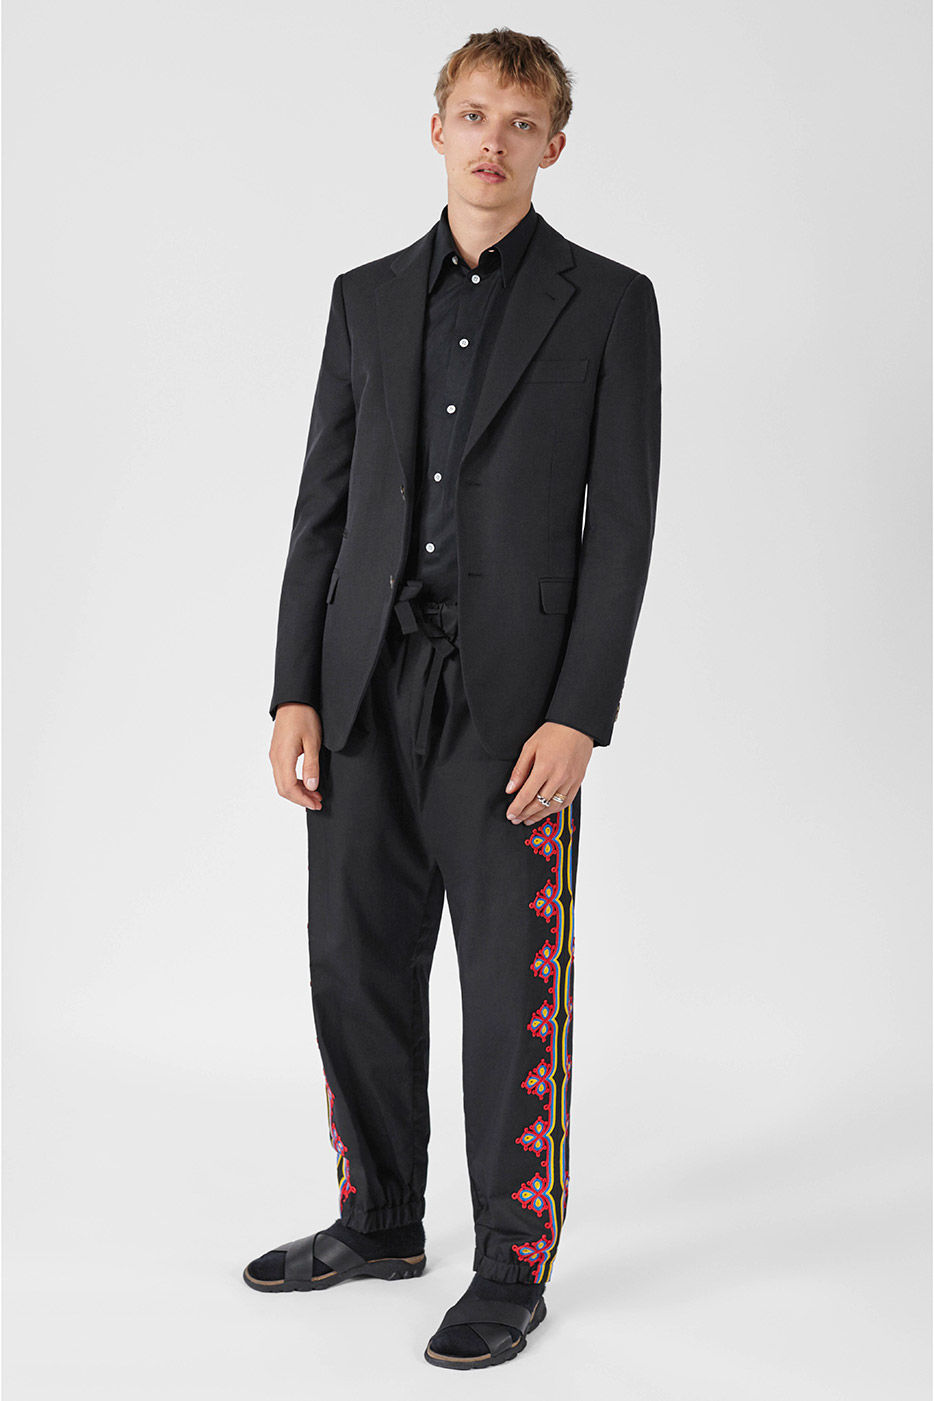 Stella McCartney's Very First Menswear Collection Is Out | Preview.ph